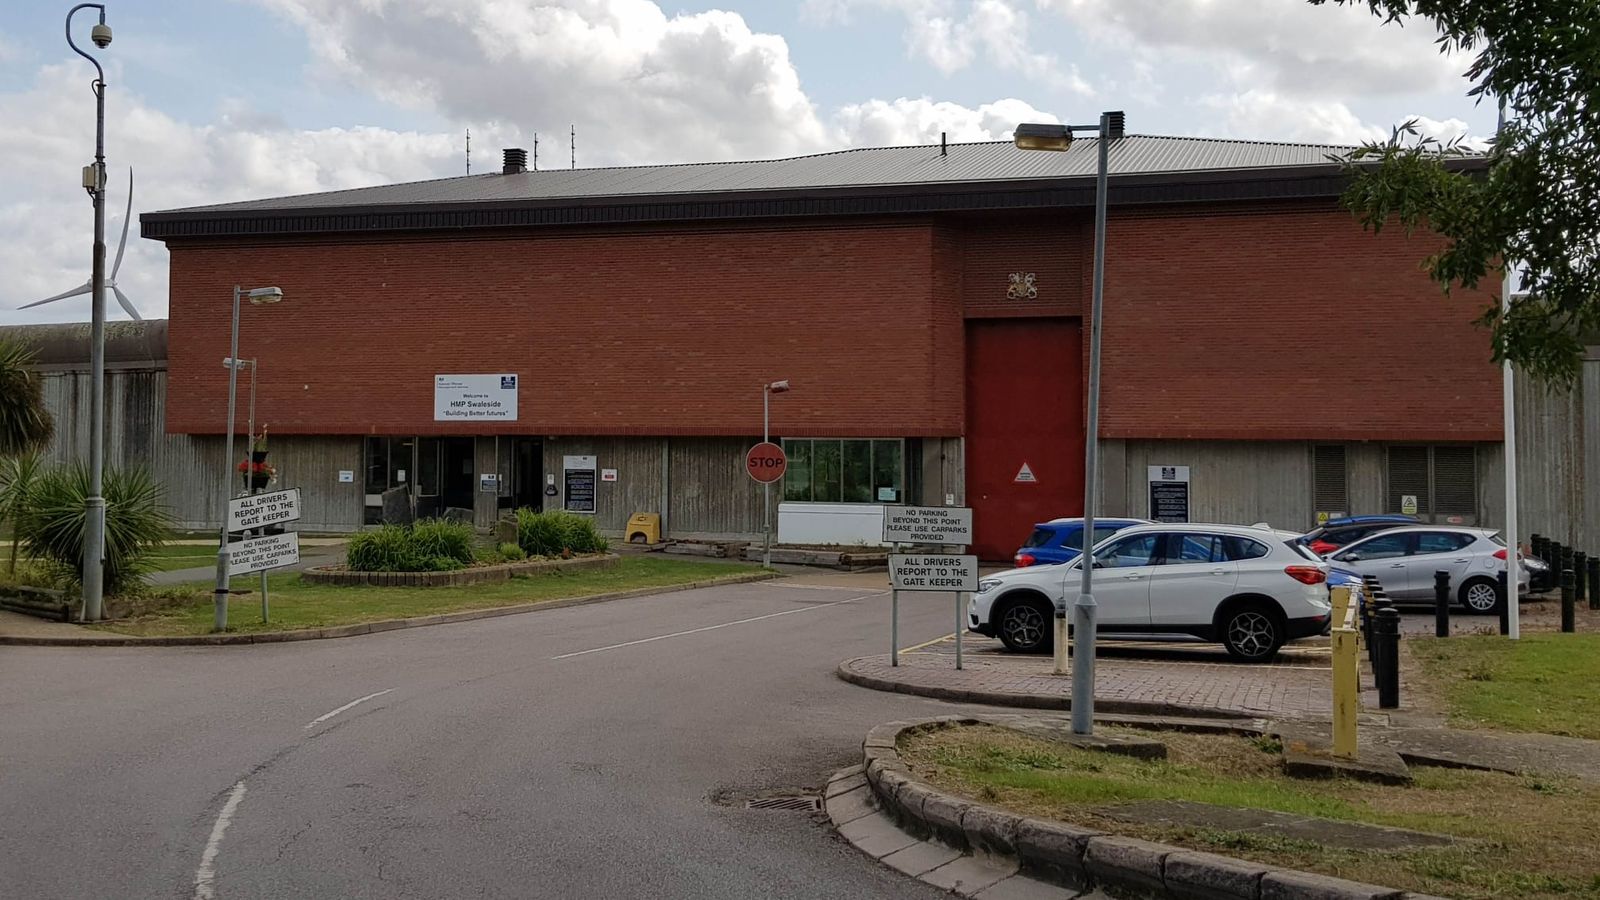 25 workers 'poisoned' at prison by 'inmates working in staff canteen'